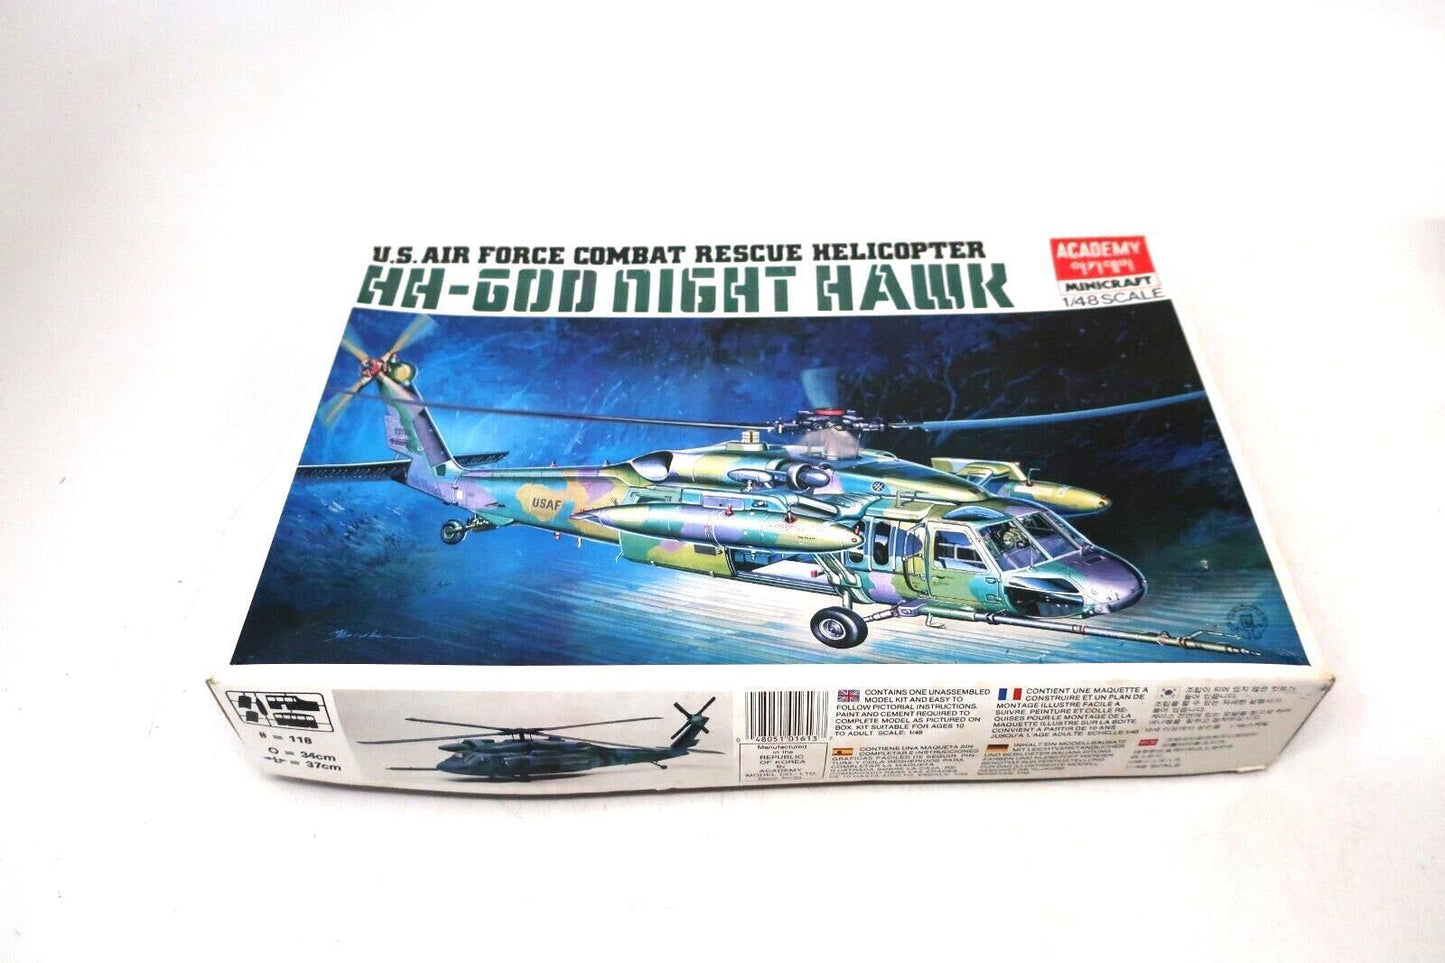 ACADEMY MINICRAFT 1:48 COMBAT RESCUE HELICOPTER HH-60D NIGHT HAWK KIT #1613